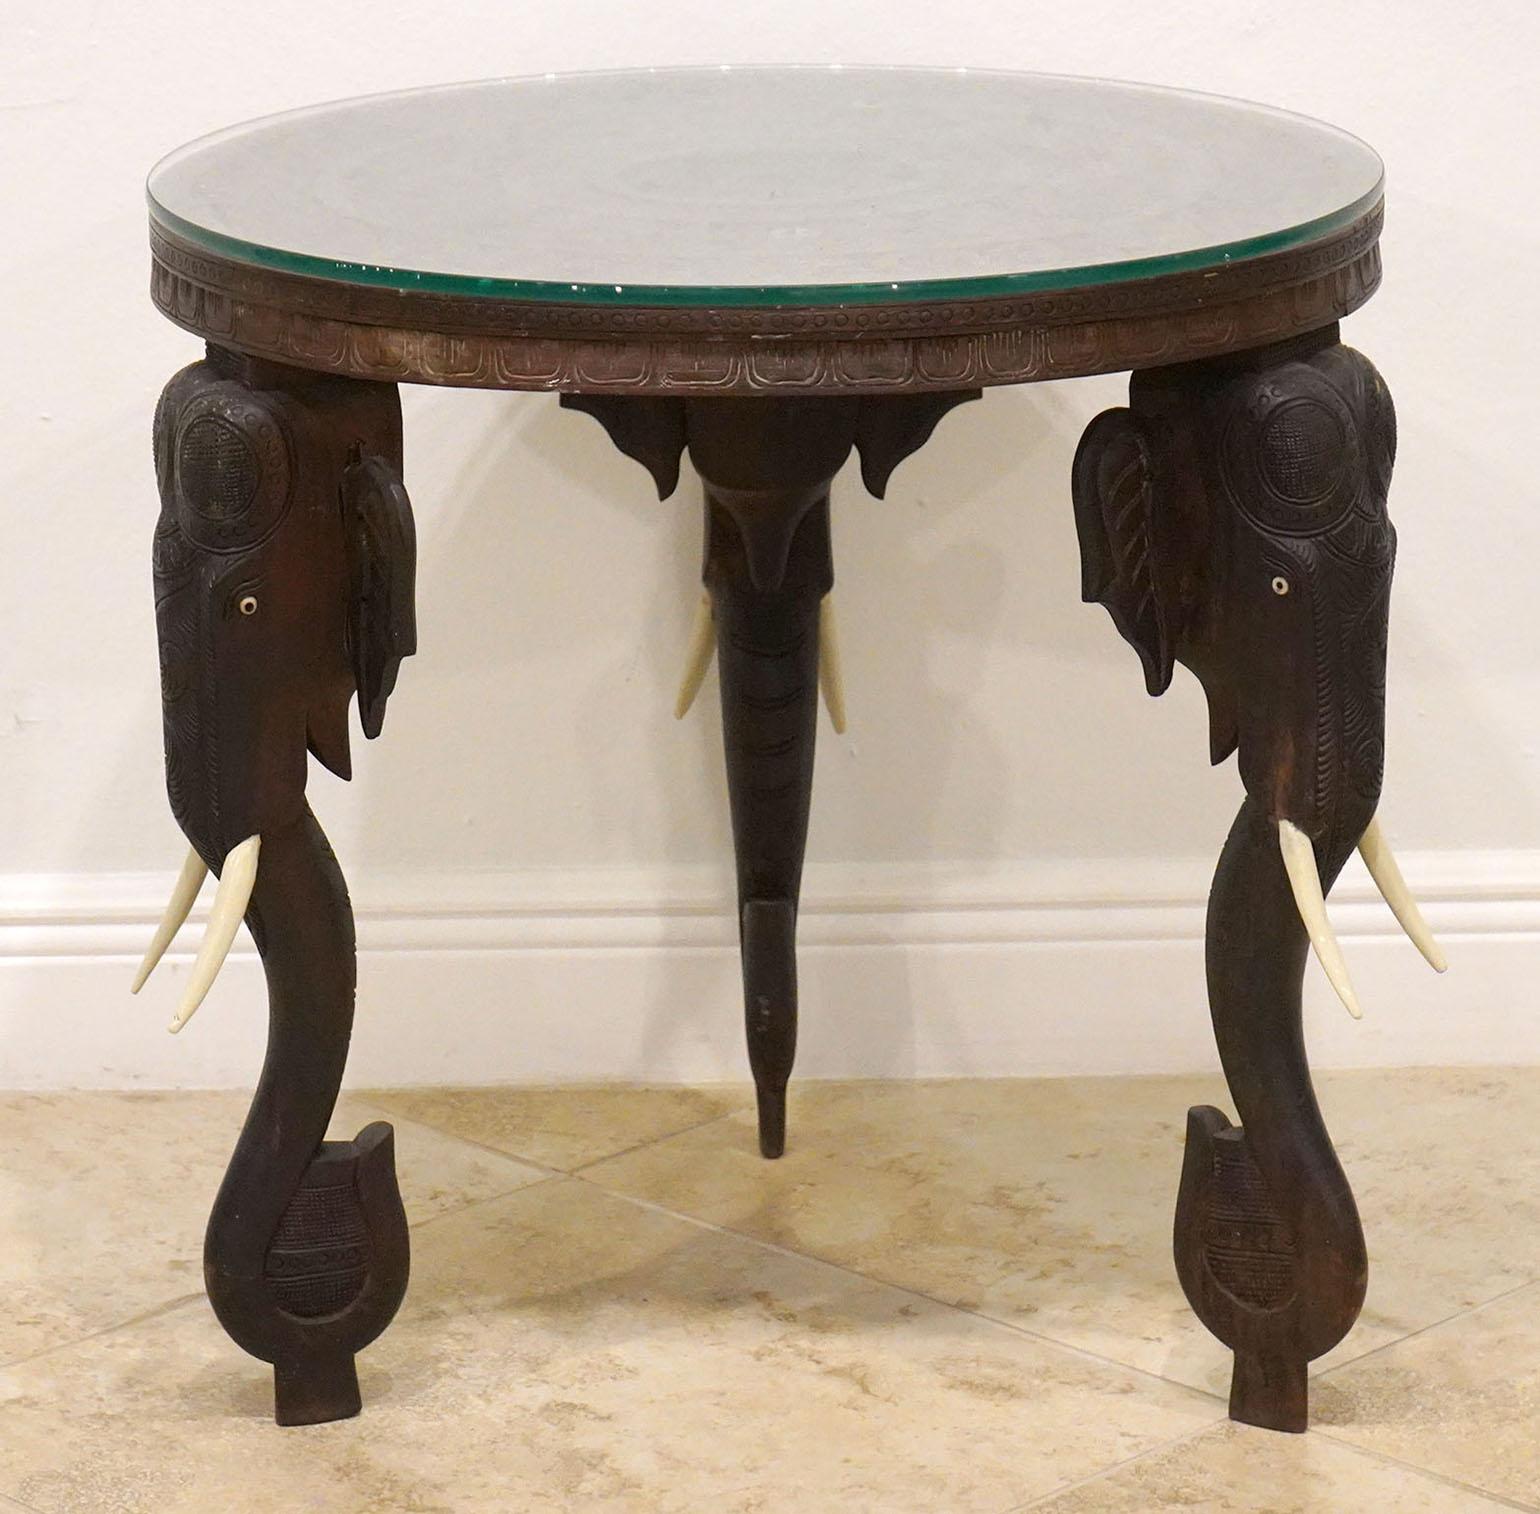 Anglo Indian carved round table with Elephant leg supports. Late 19th Century With Carved floral design top. Glass top can be removed.